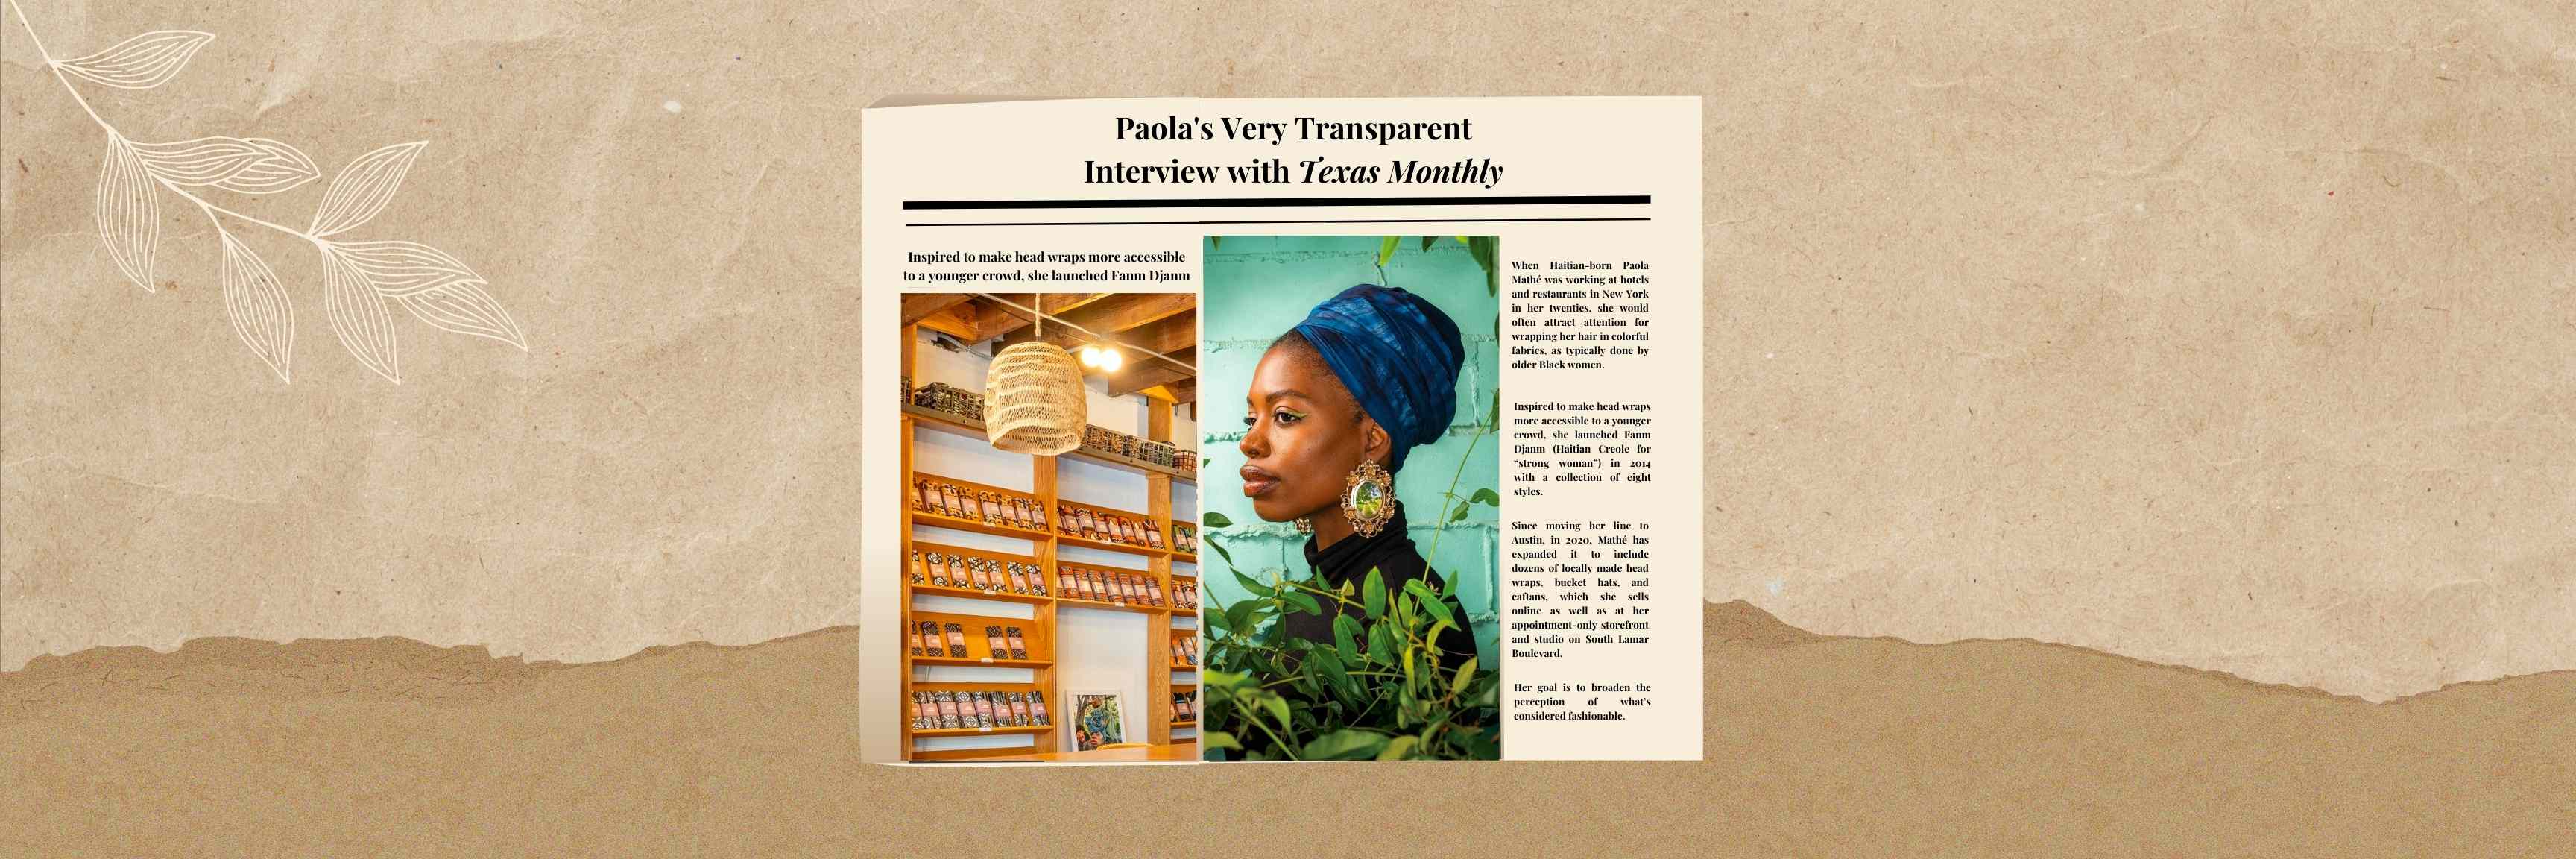 Paola's Very Transparent Interview with Texas Monthly